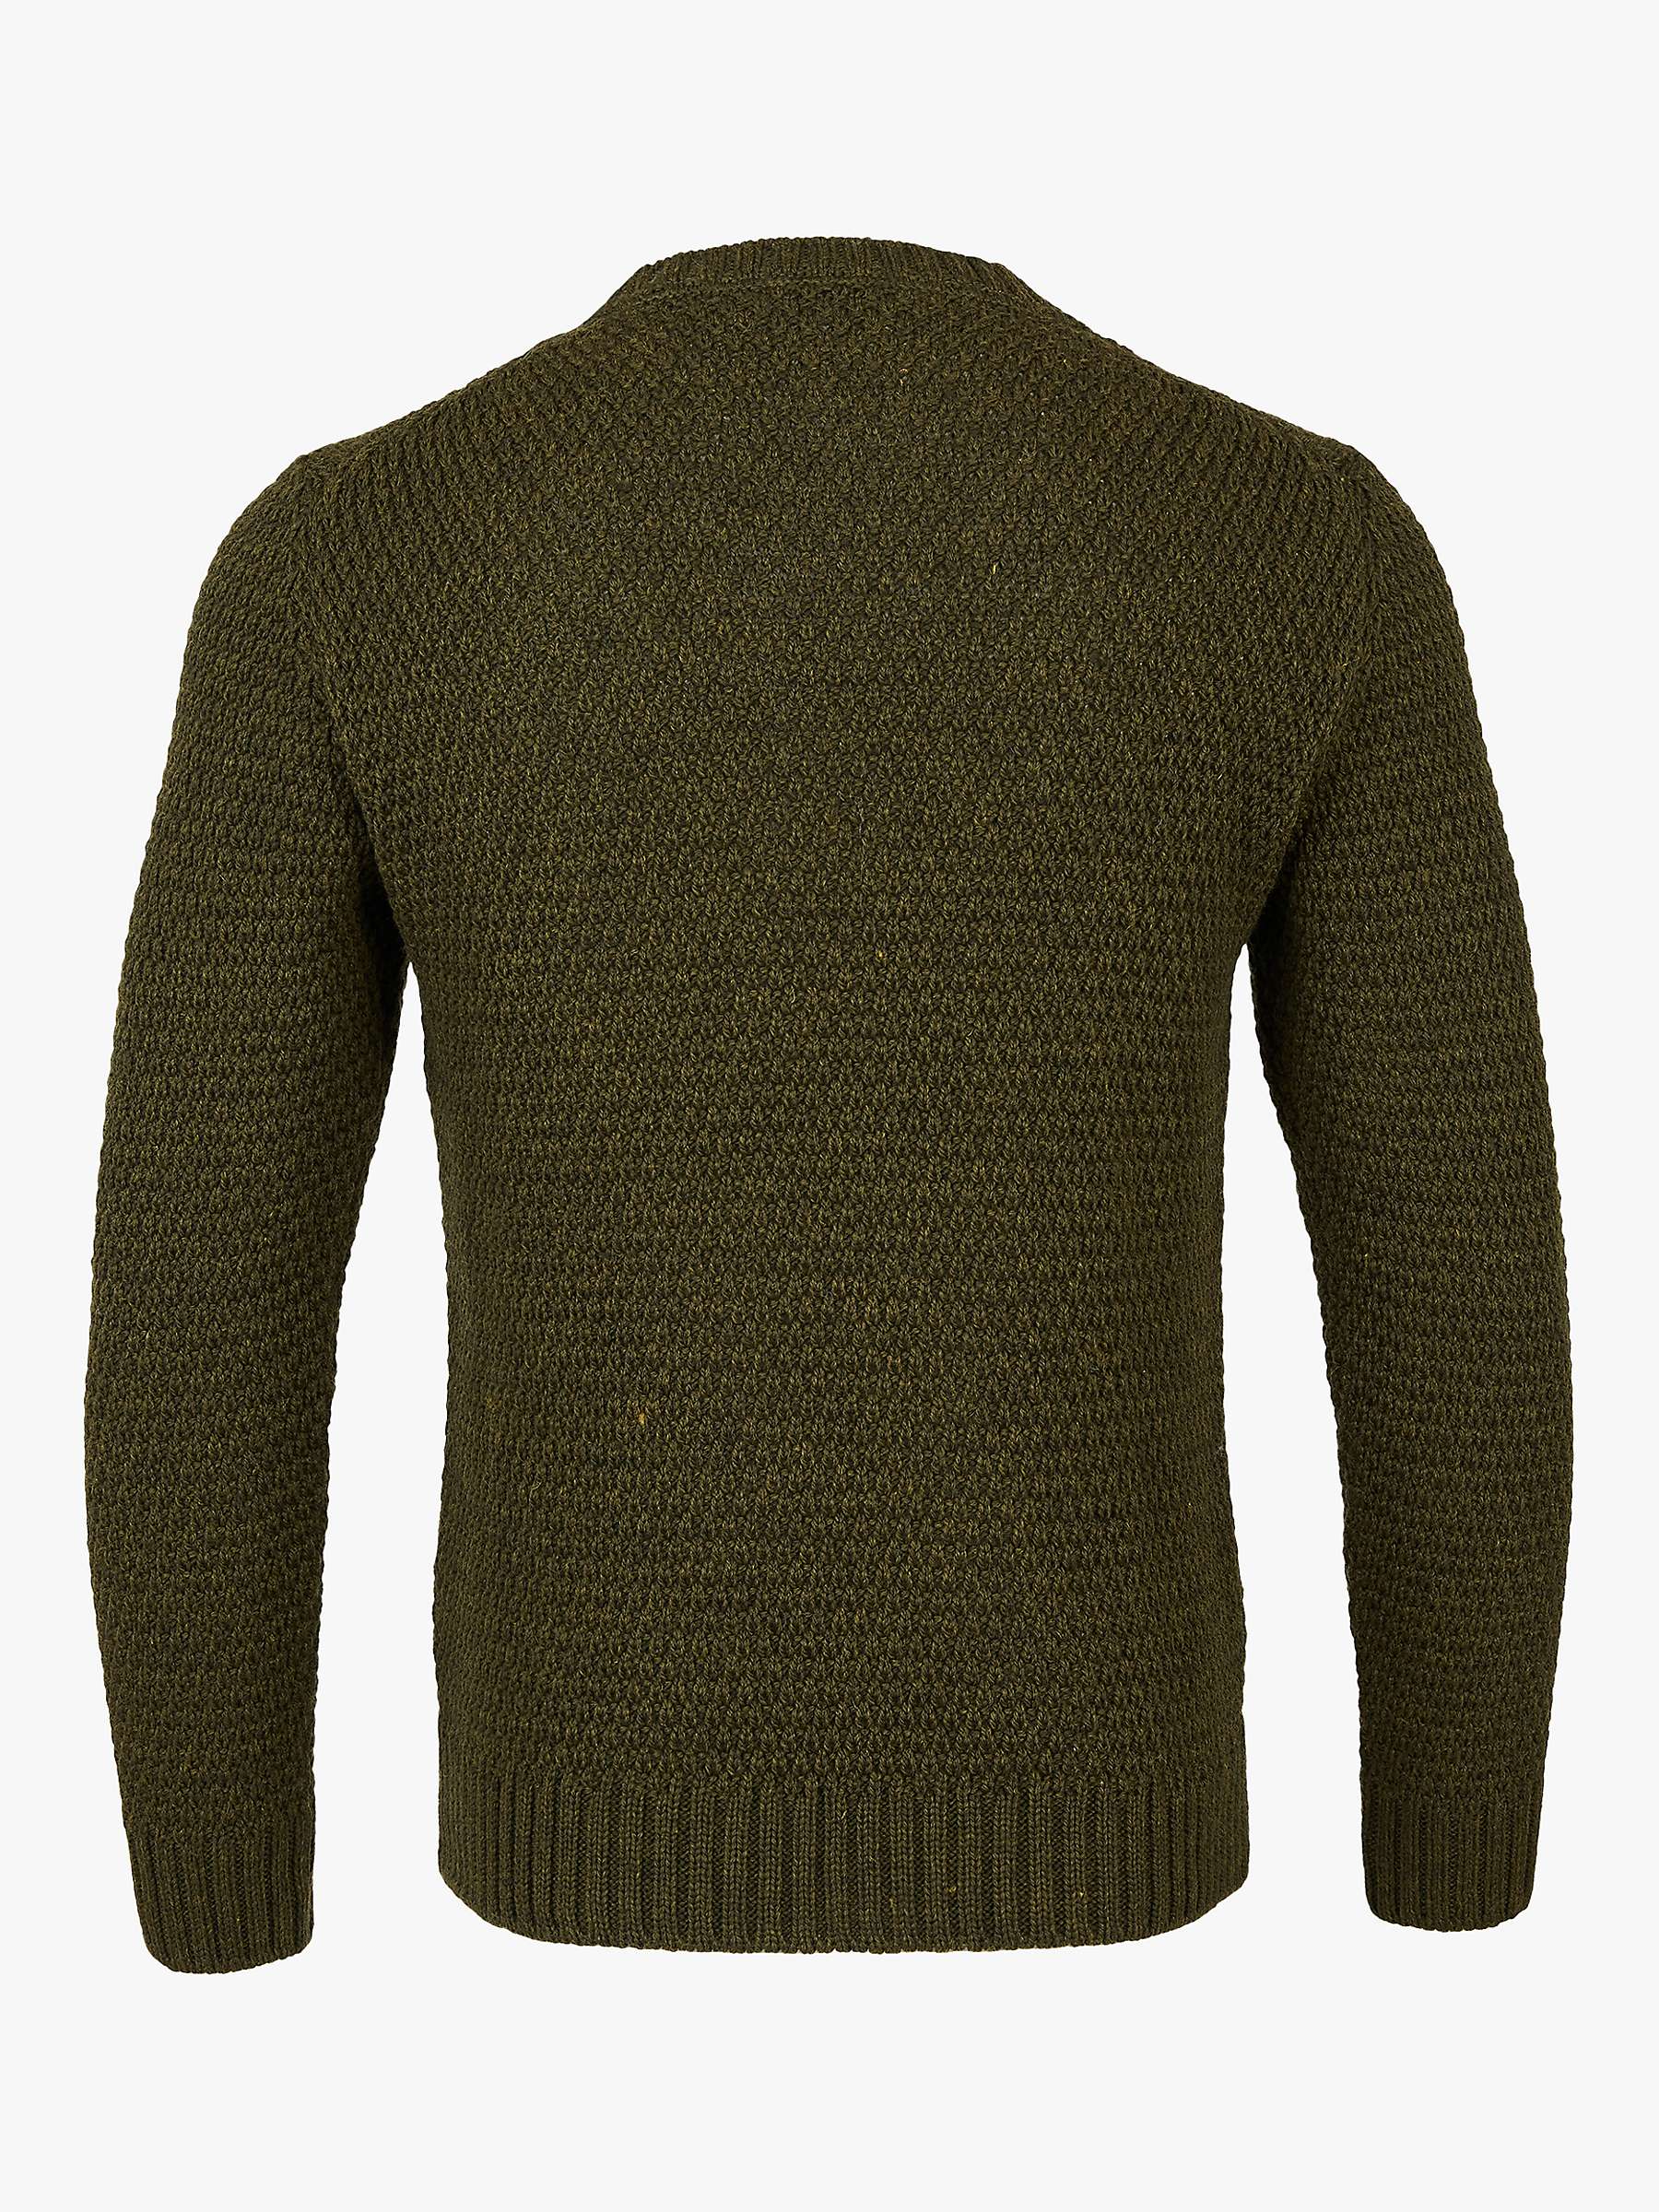 Celtic & Co. Cable Knit Crew Neck Jumper, Olive at John Lewis & Partners